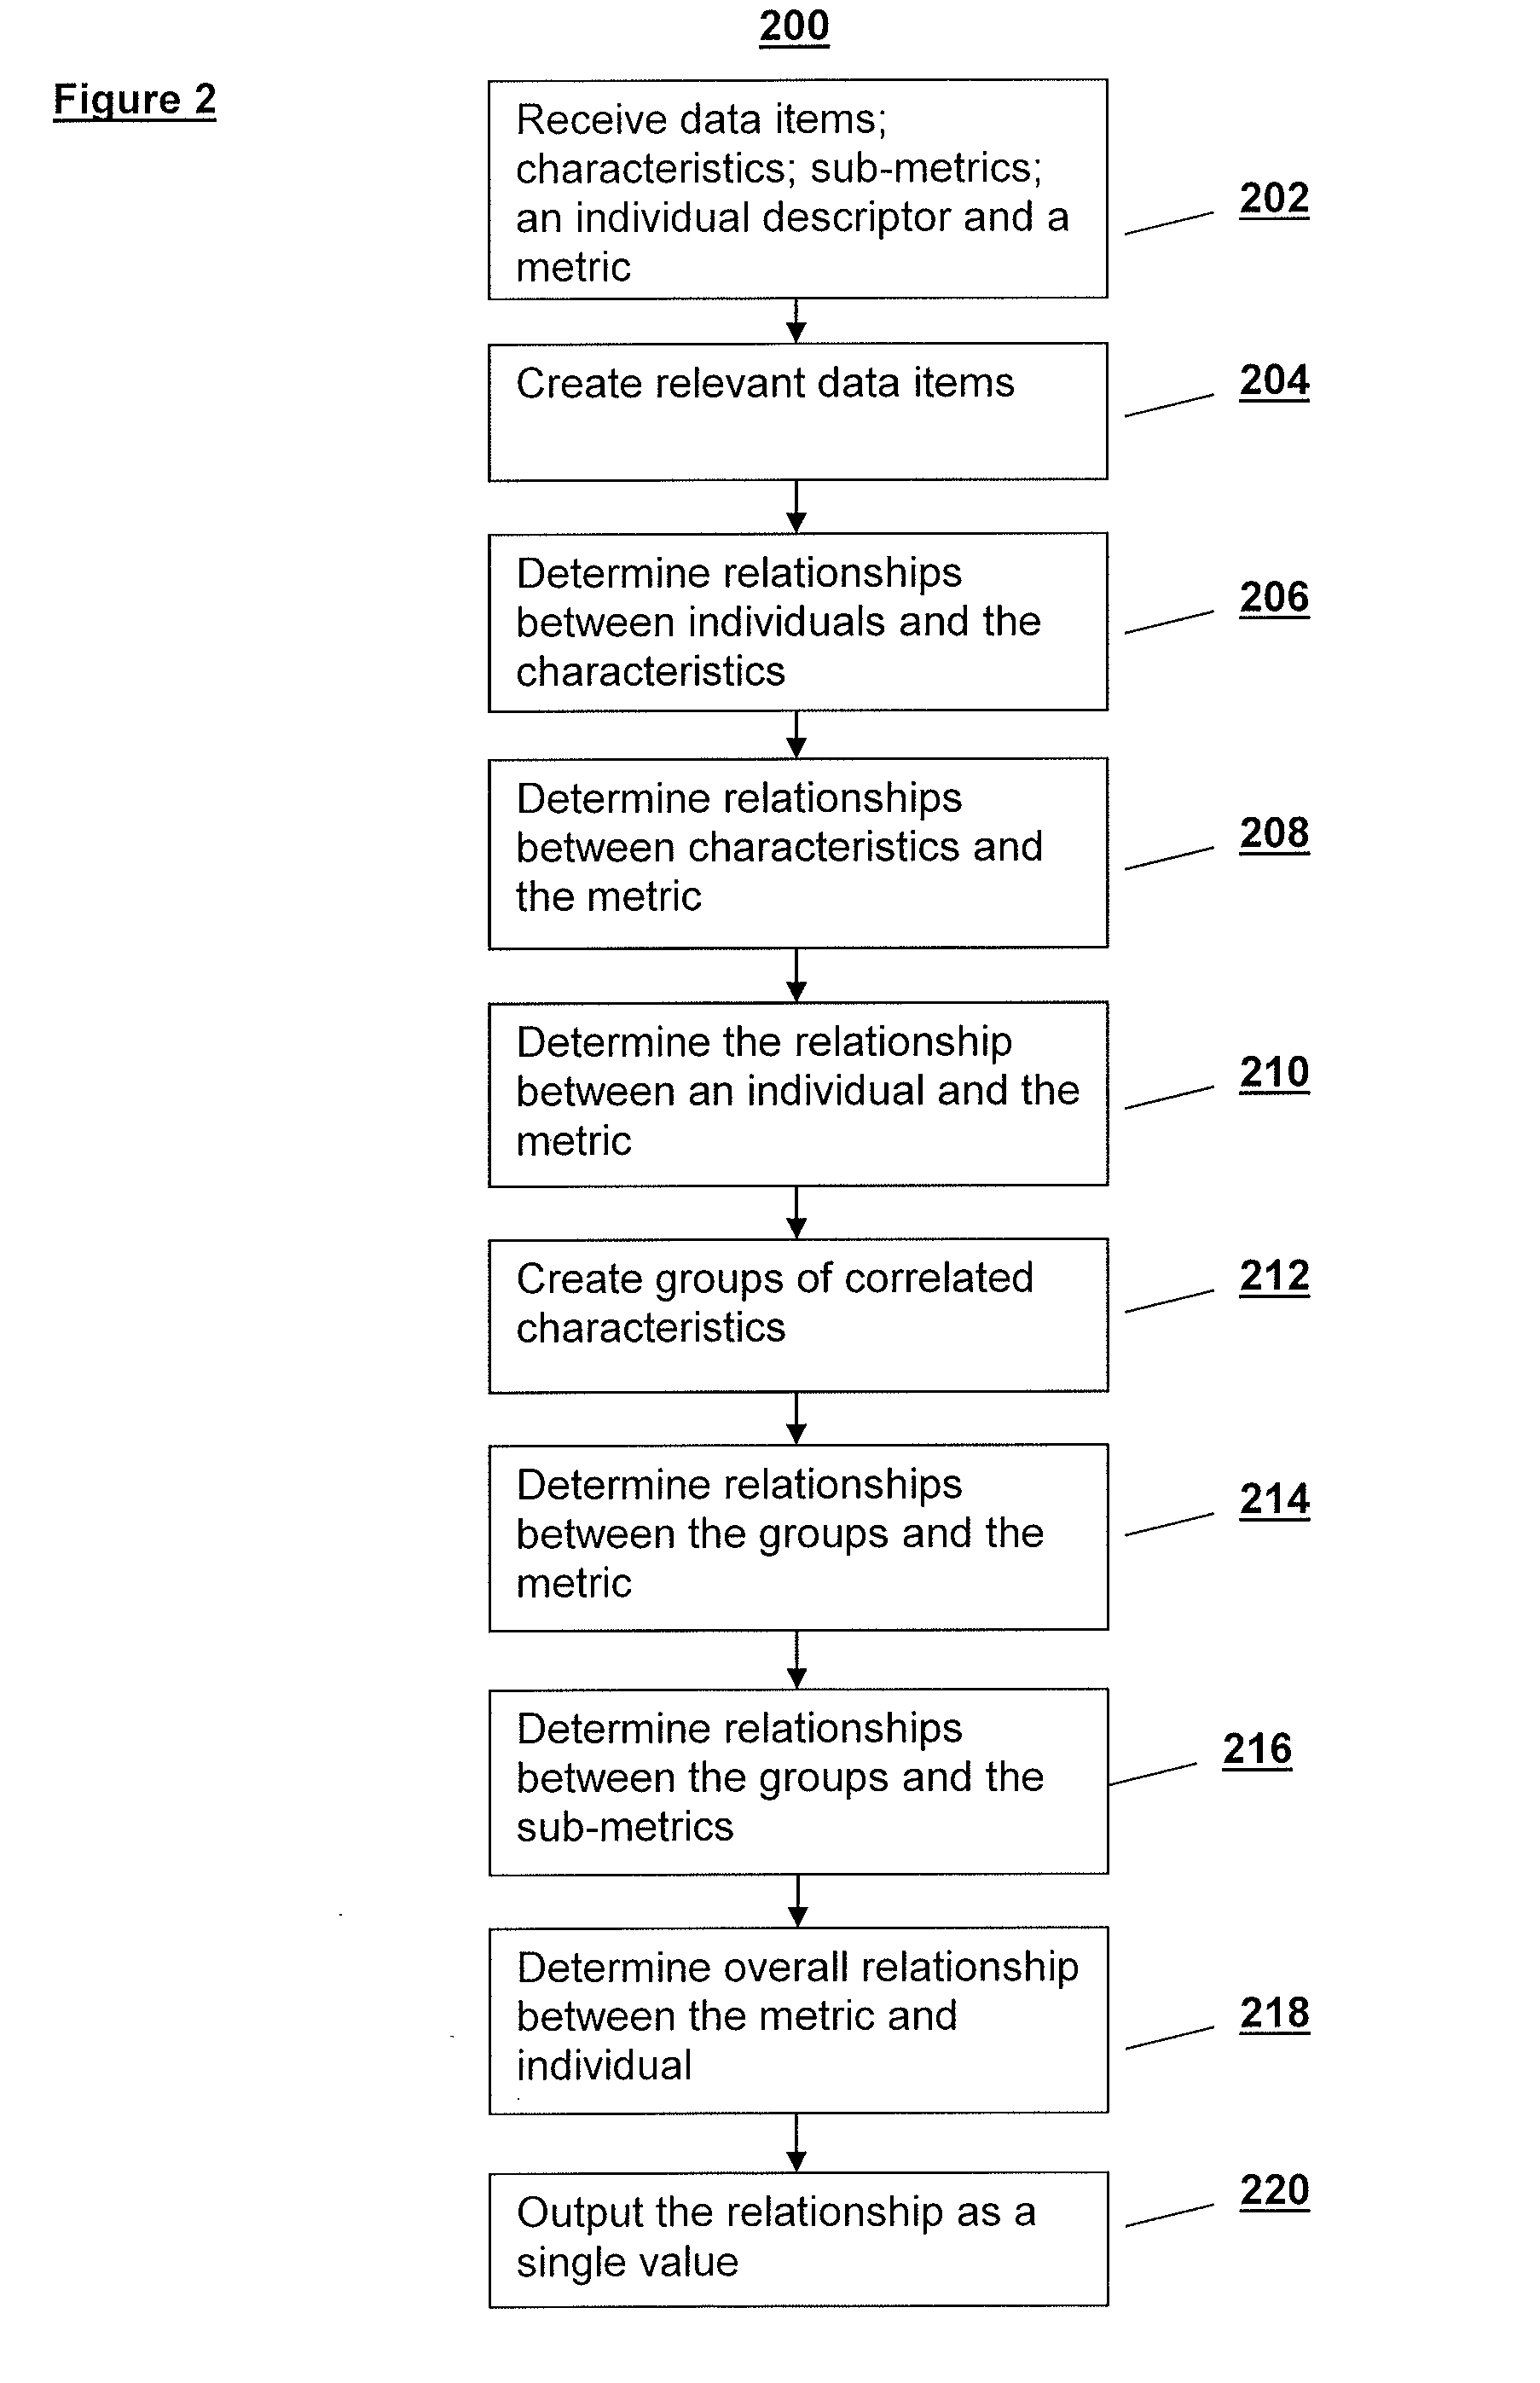 Tools and methods for determining relationship values